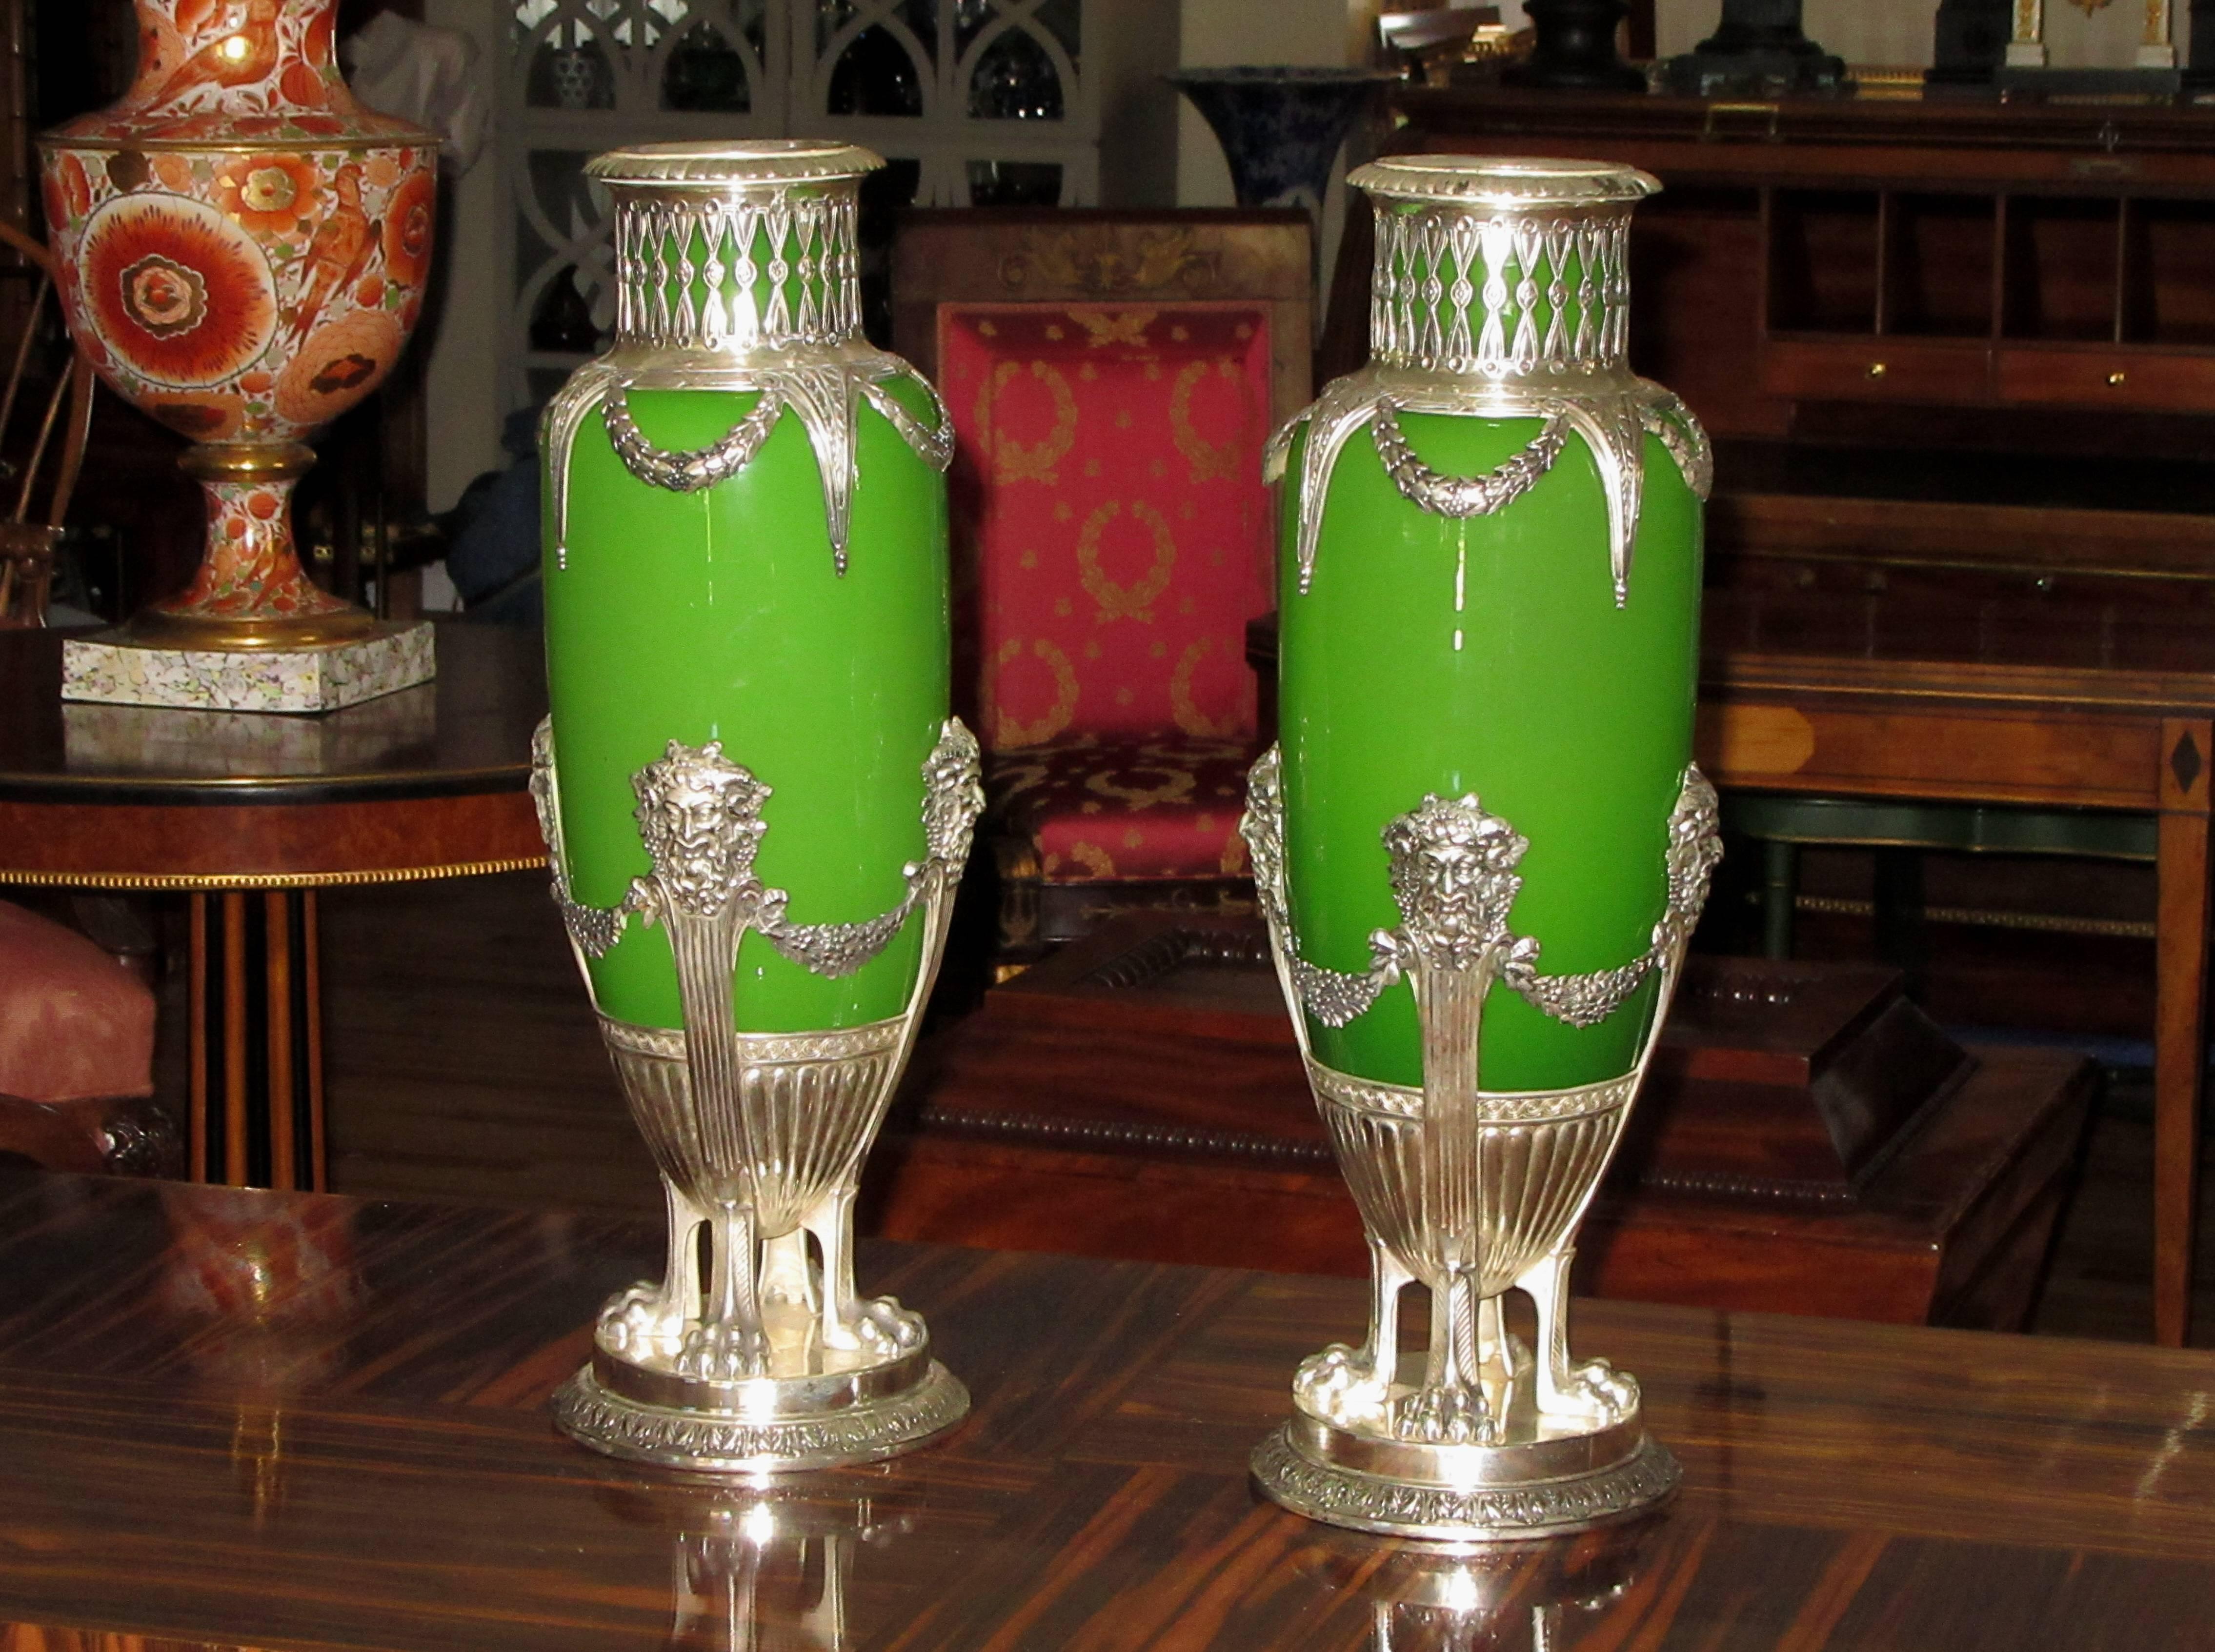 A pair of ovoid shaped vases in green opaline glass held in silvered metal mounts. Each vase is crowned with an openwork gallery that descends to the body of the vase in the form of draped laurel garlands. The body of each vase rests in a round base